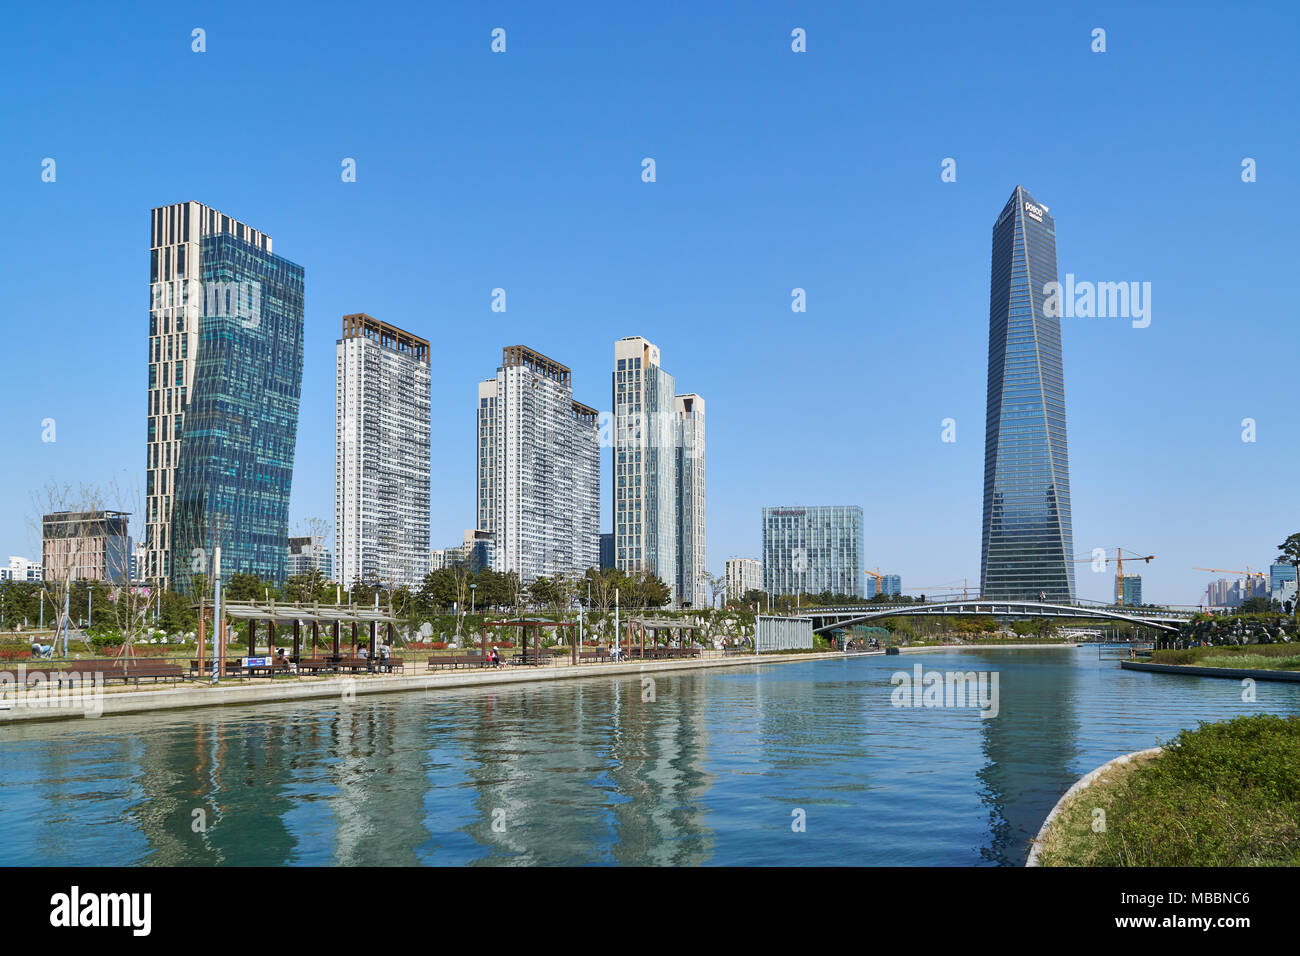 Incheon, Korea - April 27, 2017: Songdo International Business District (Songdo IBD) with Songdo Central Park. The city is a new smart city and connec Stock Photo